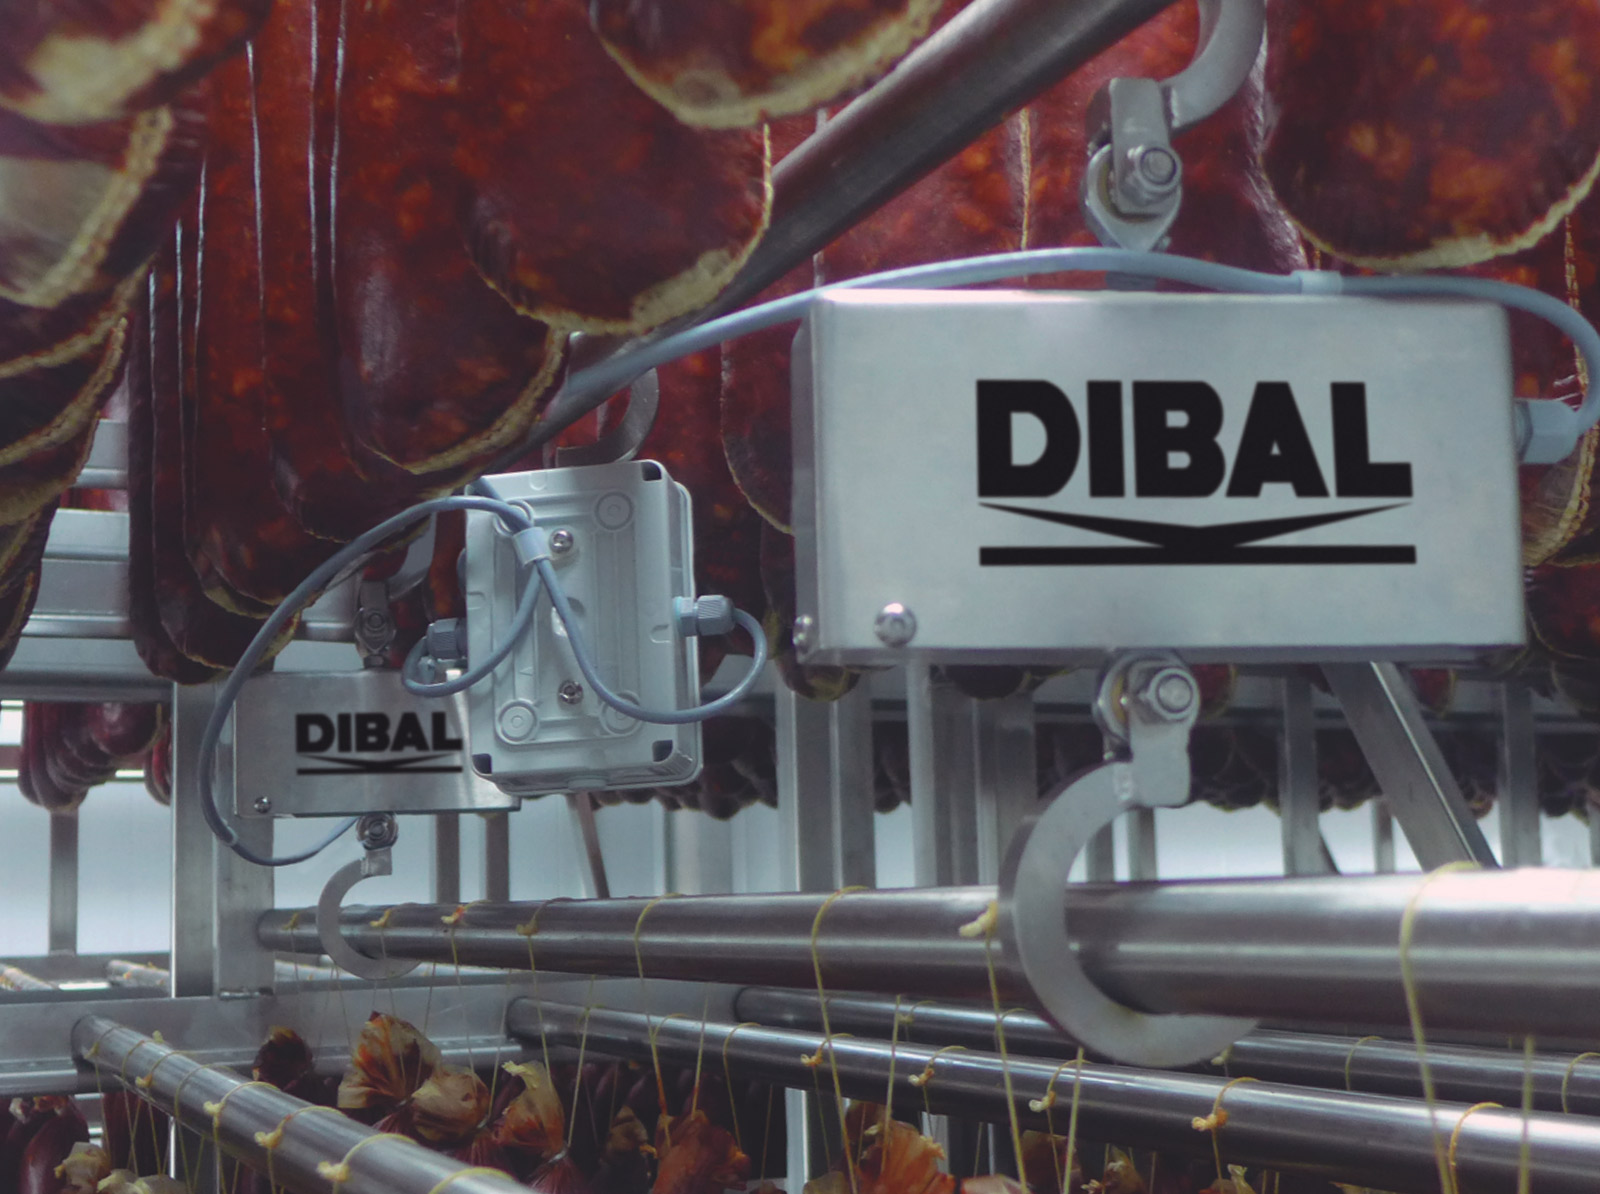 Dibal installation to control sausage curing in drying rooms